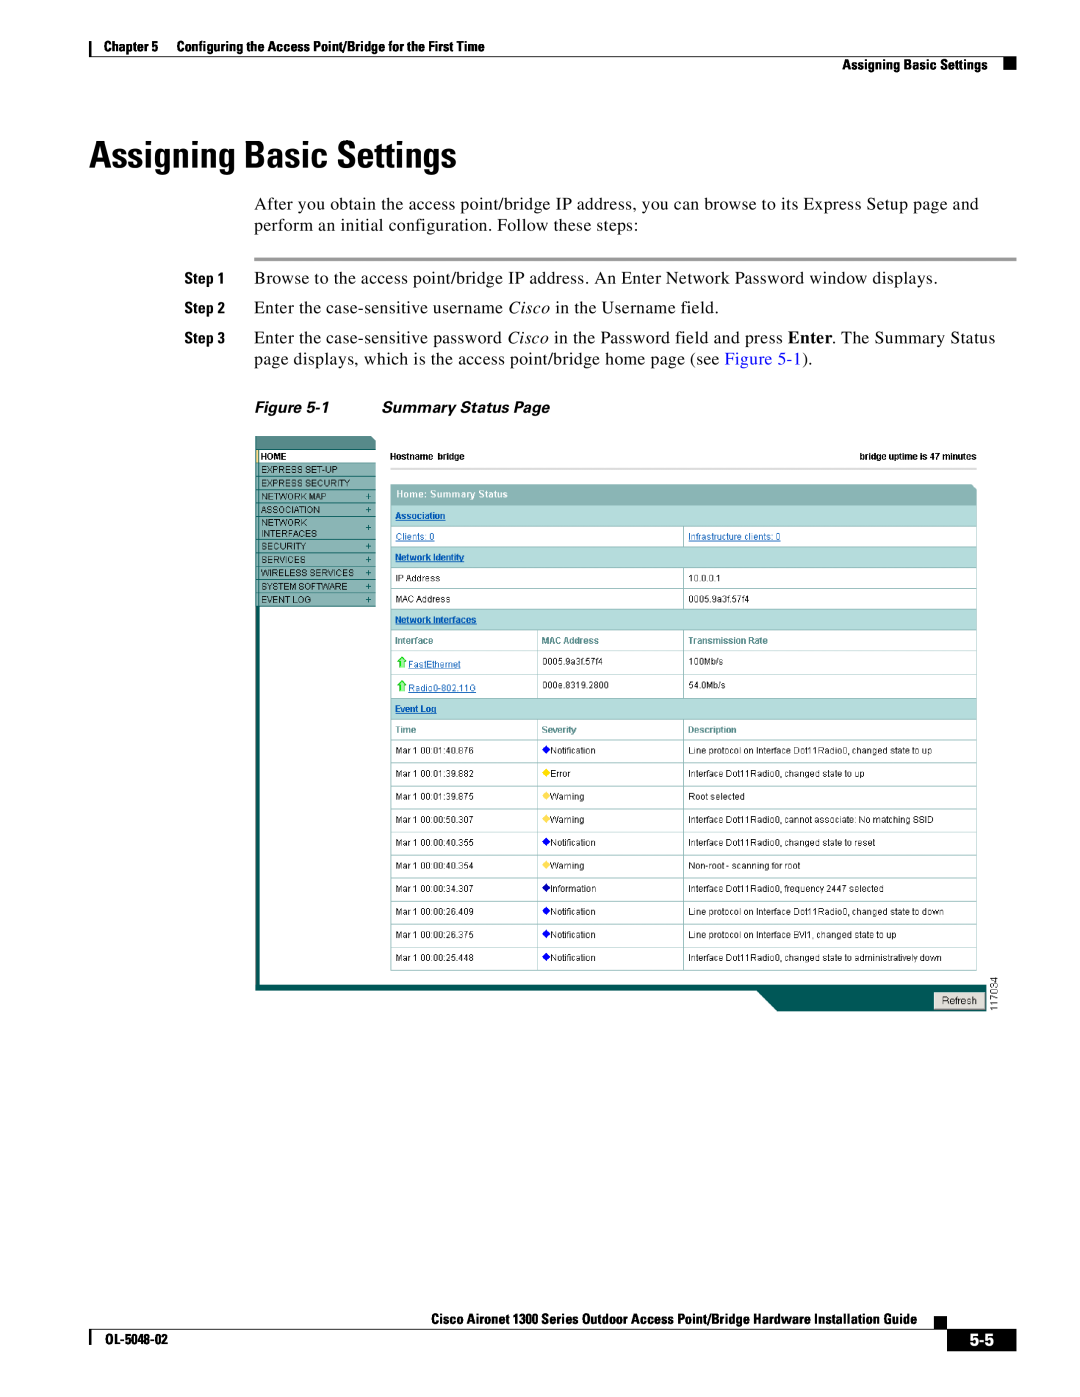 Cisco Systems 1300 Series manual Assigning Basic Settings 